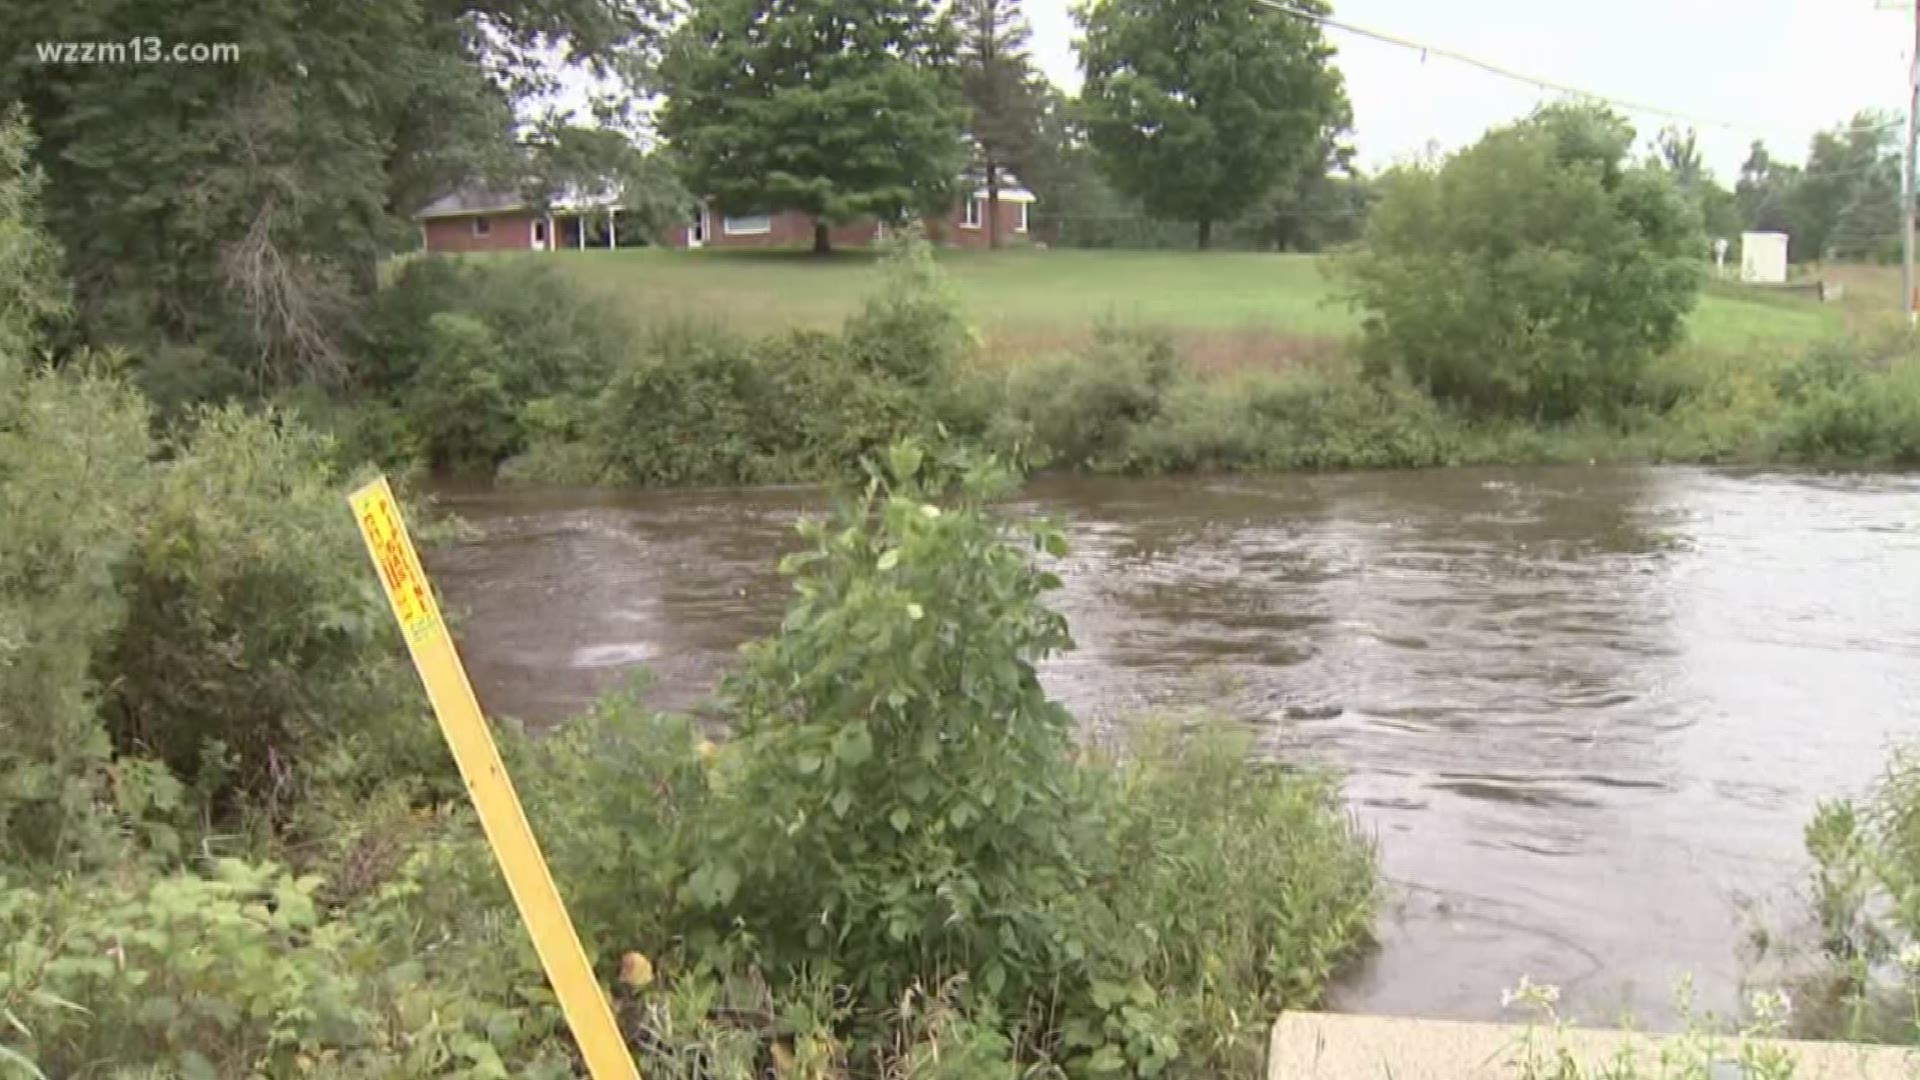 Heavy rain causes problems for kayakers in Rockford